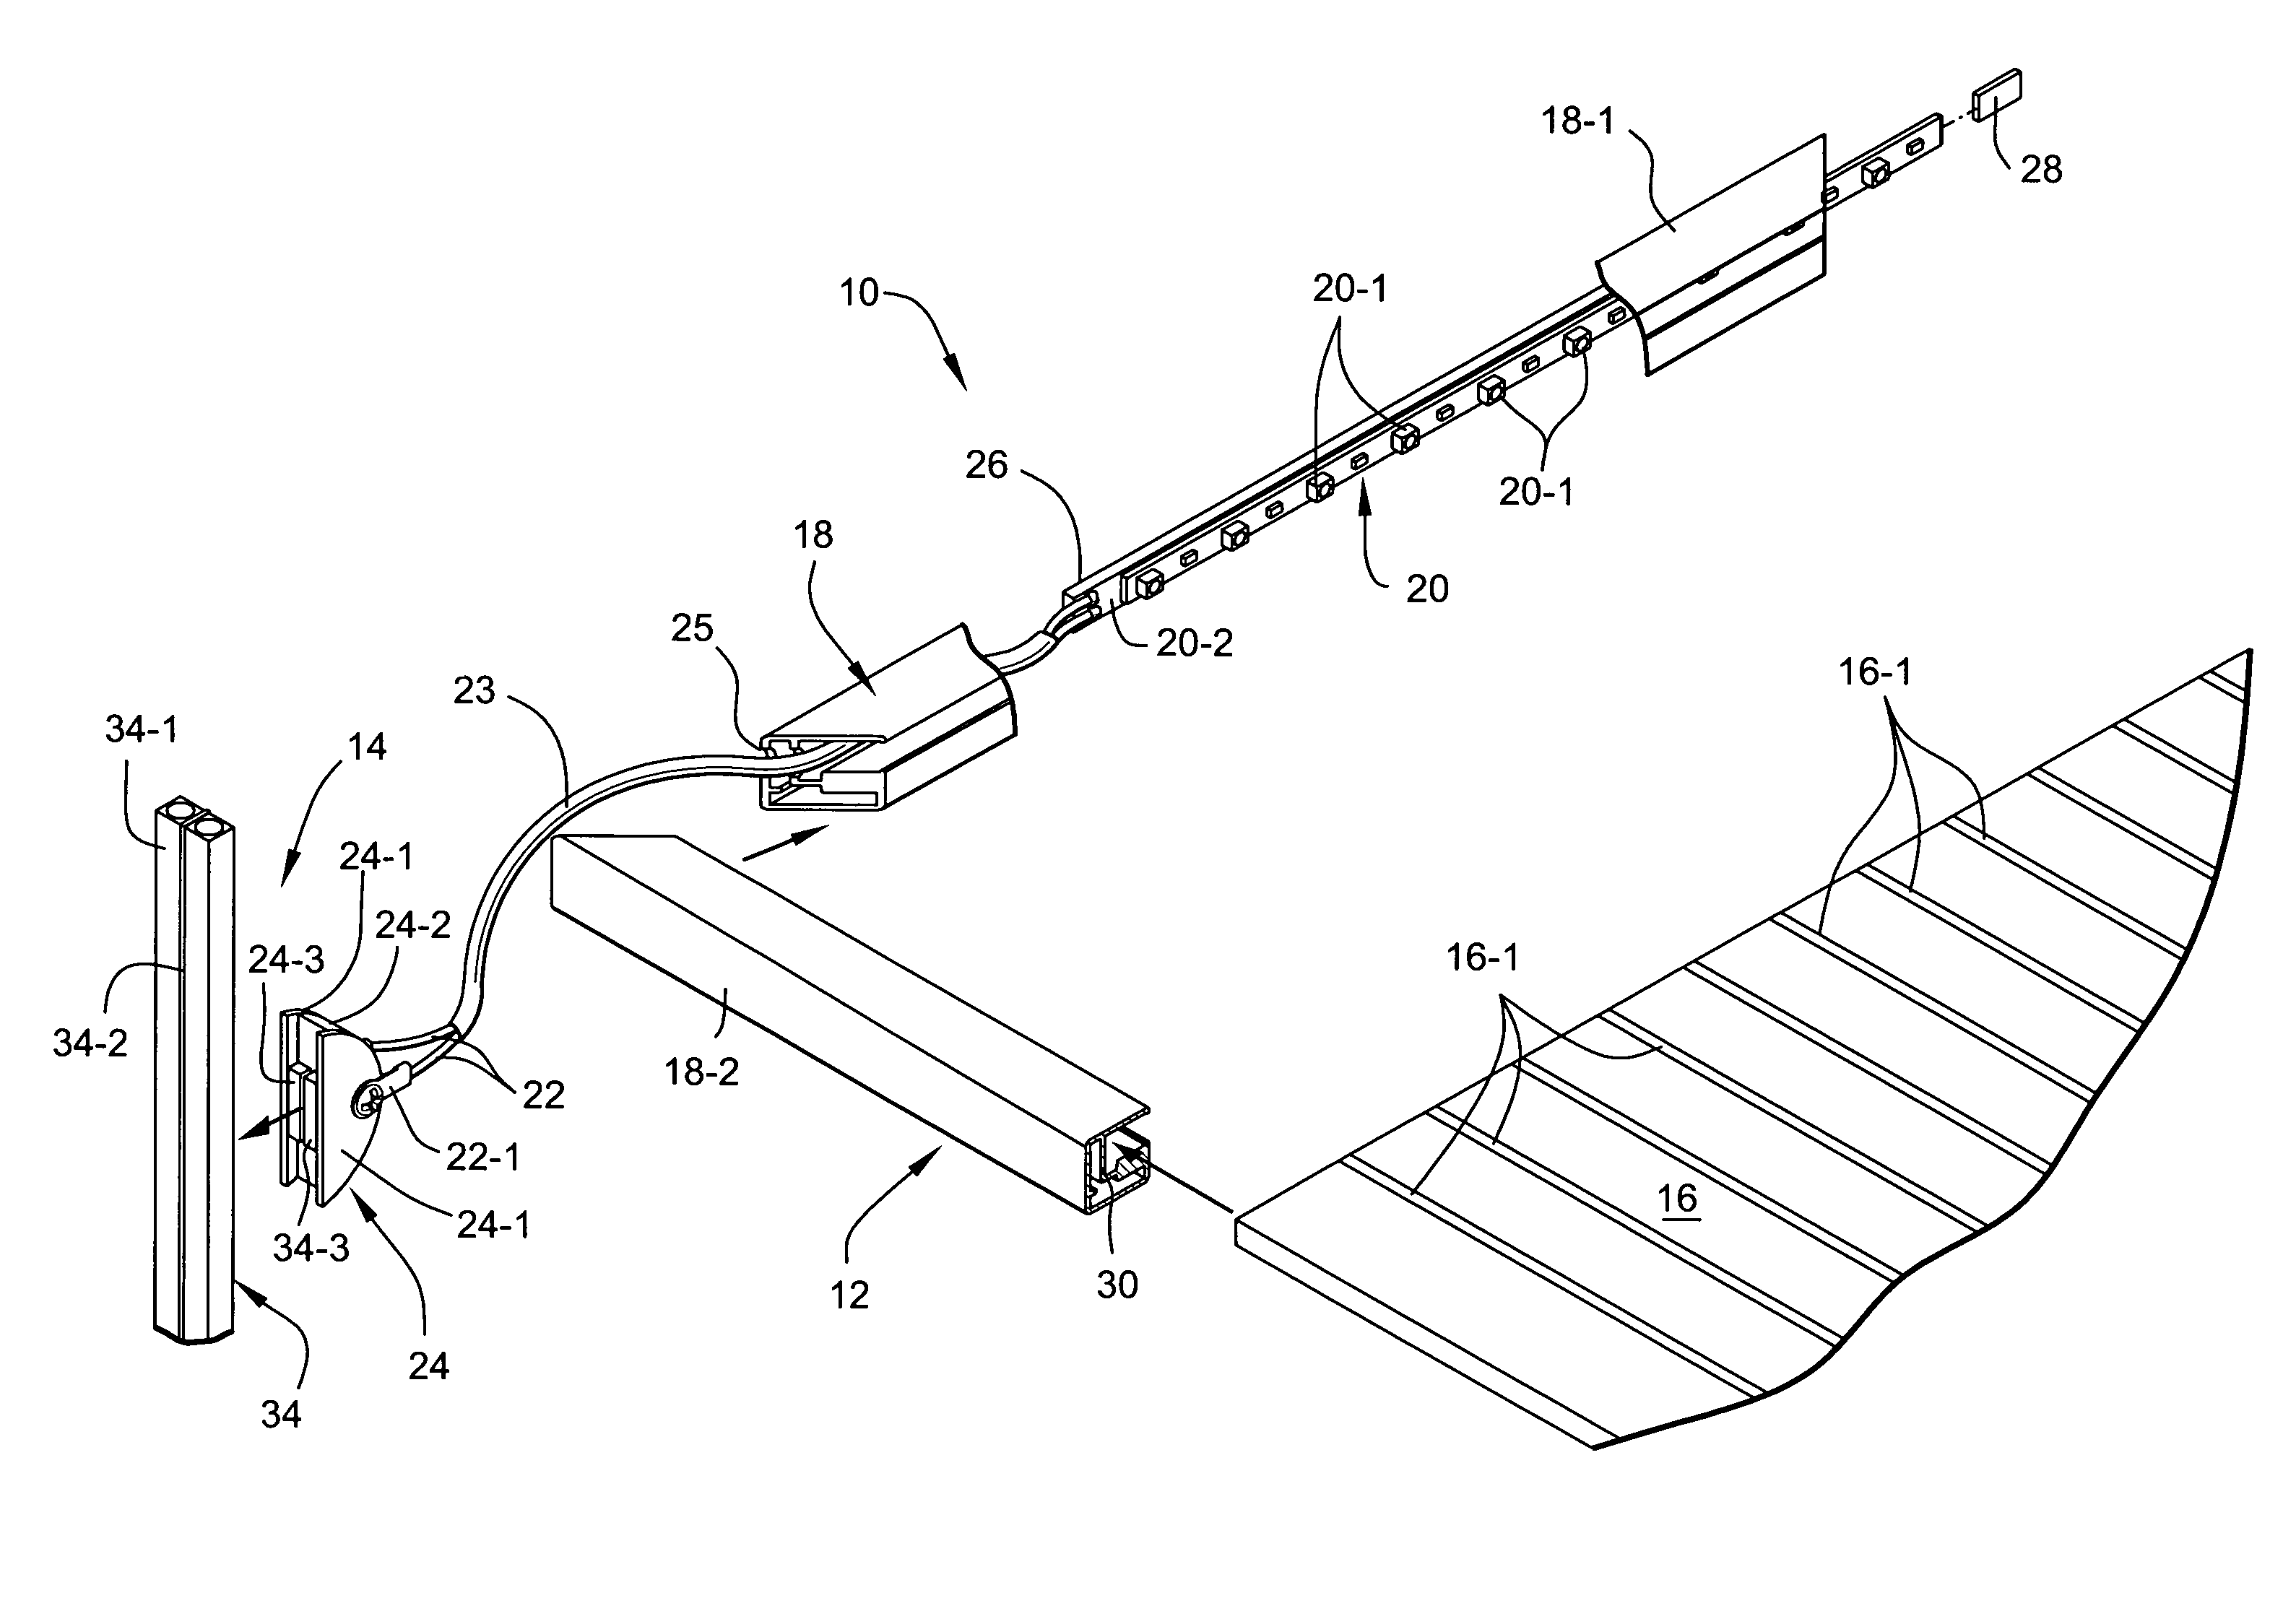 Self-illuminated structural panel units and systems including the same